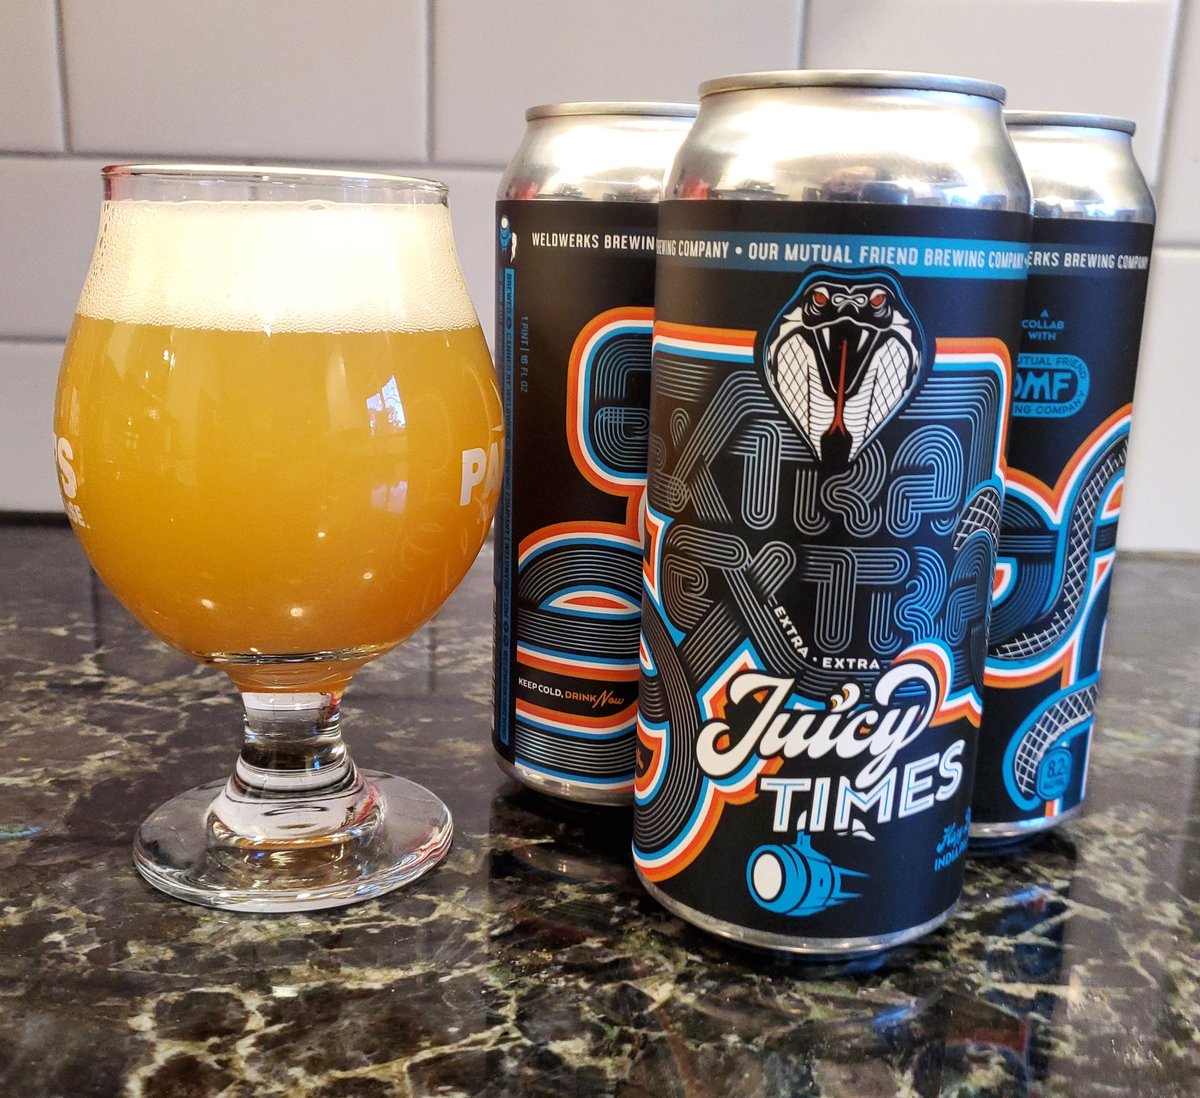 Extra Extra Juicy Times DIPA collab by Weldwerks Brewing and Our Mutual Friend Brewing! Comes in at 8.2% - 🔥! Cheers Peeps 🍻 @ephoustonbill @BPlohocky @RealBMaxwell @Senor_Greezy @D_V_T_ @mikeadam16 @BigChiefSpyBoy #CraftBeer #beer